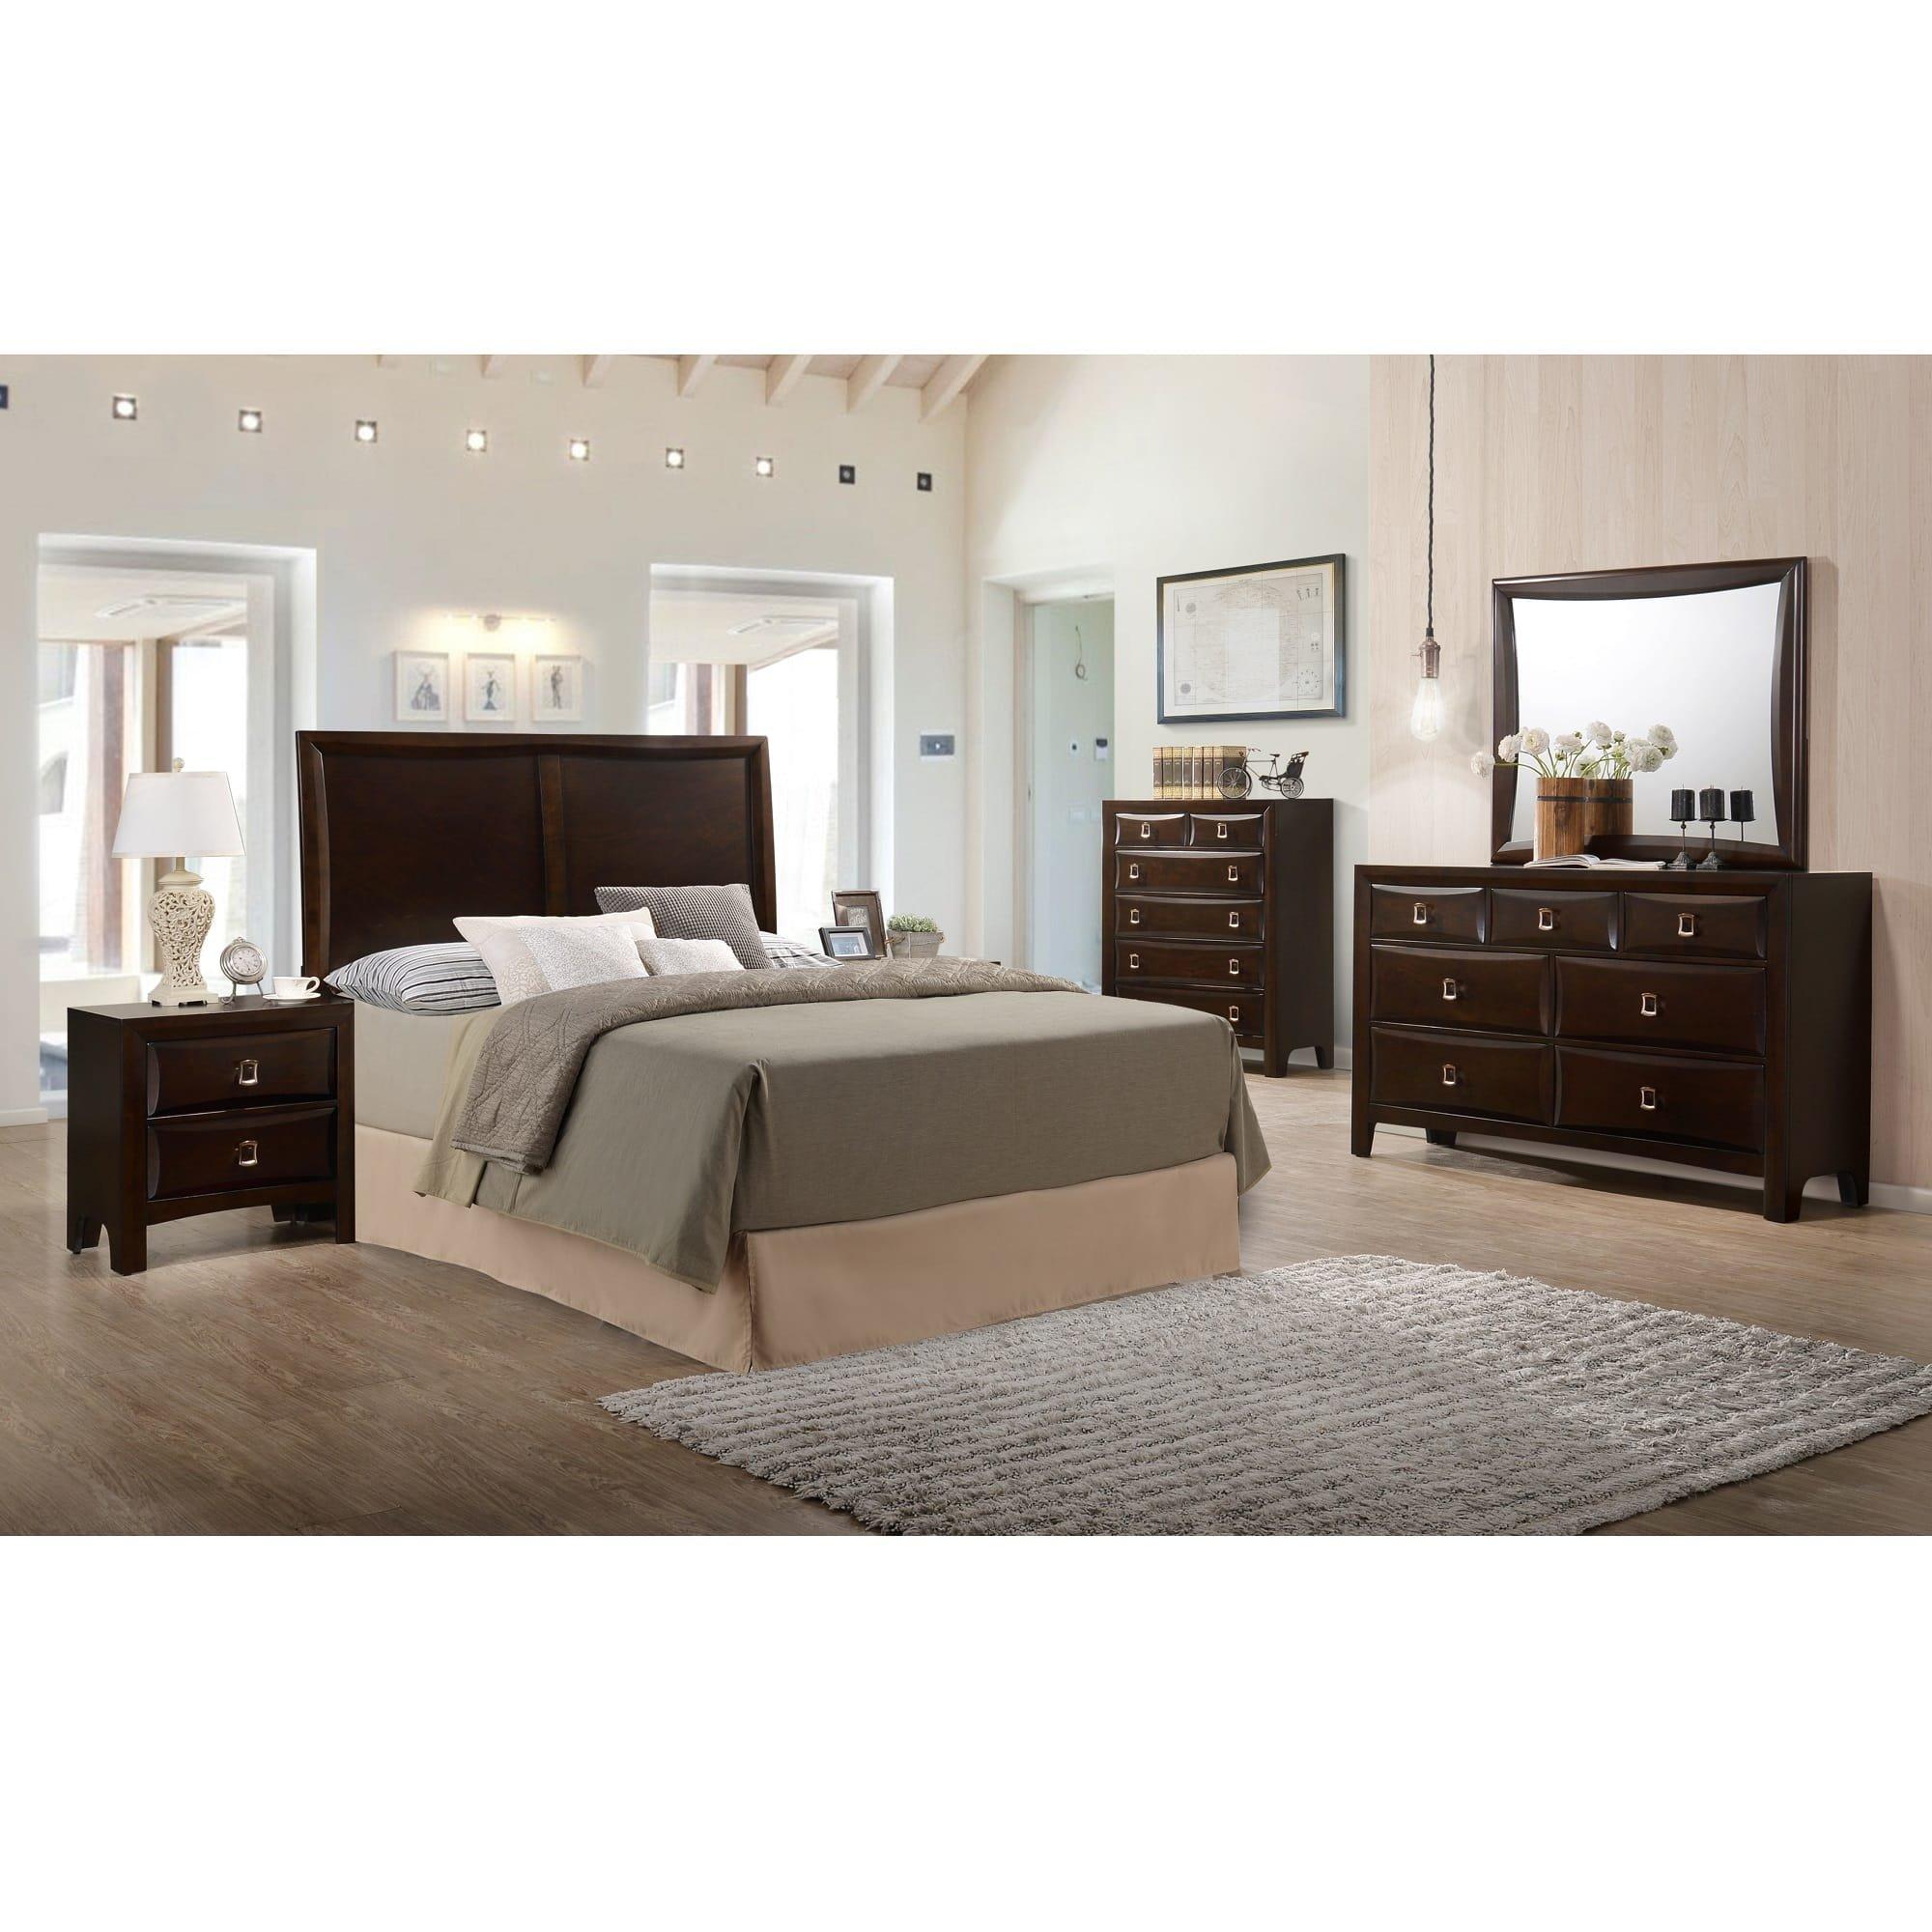 Rent To Own Step One Furniture 10 Piece Franklin King Bedroom W Beautyrest Euro Top Plush Mattress At Aaron S Today